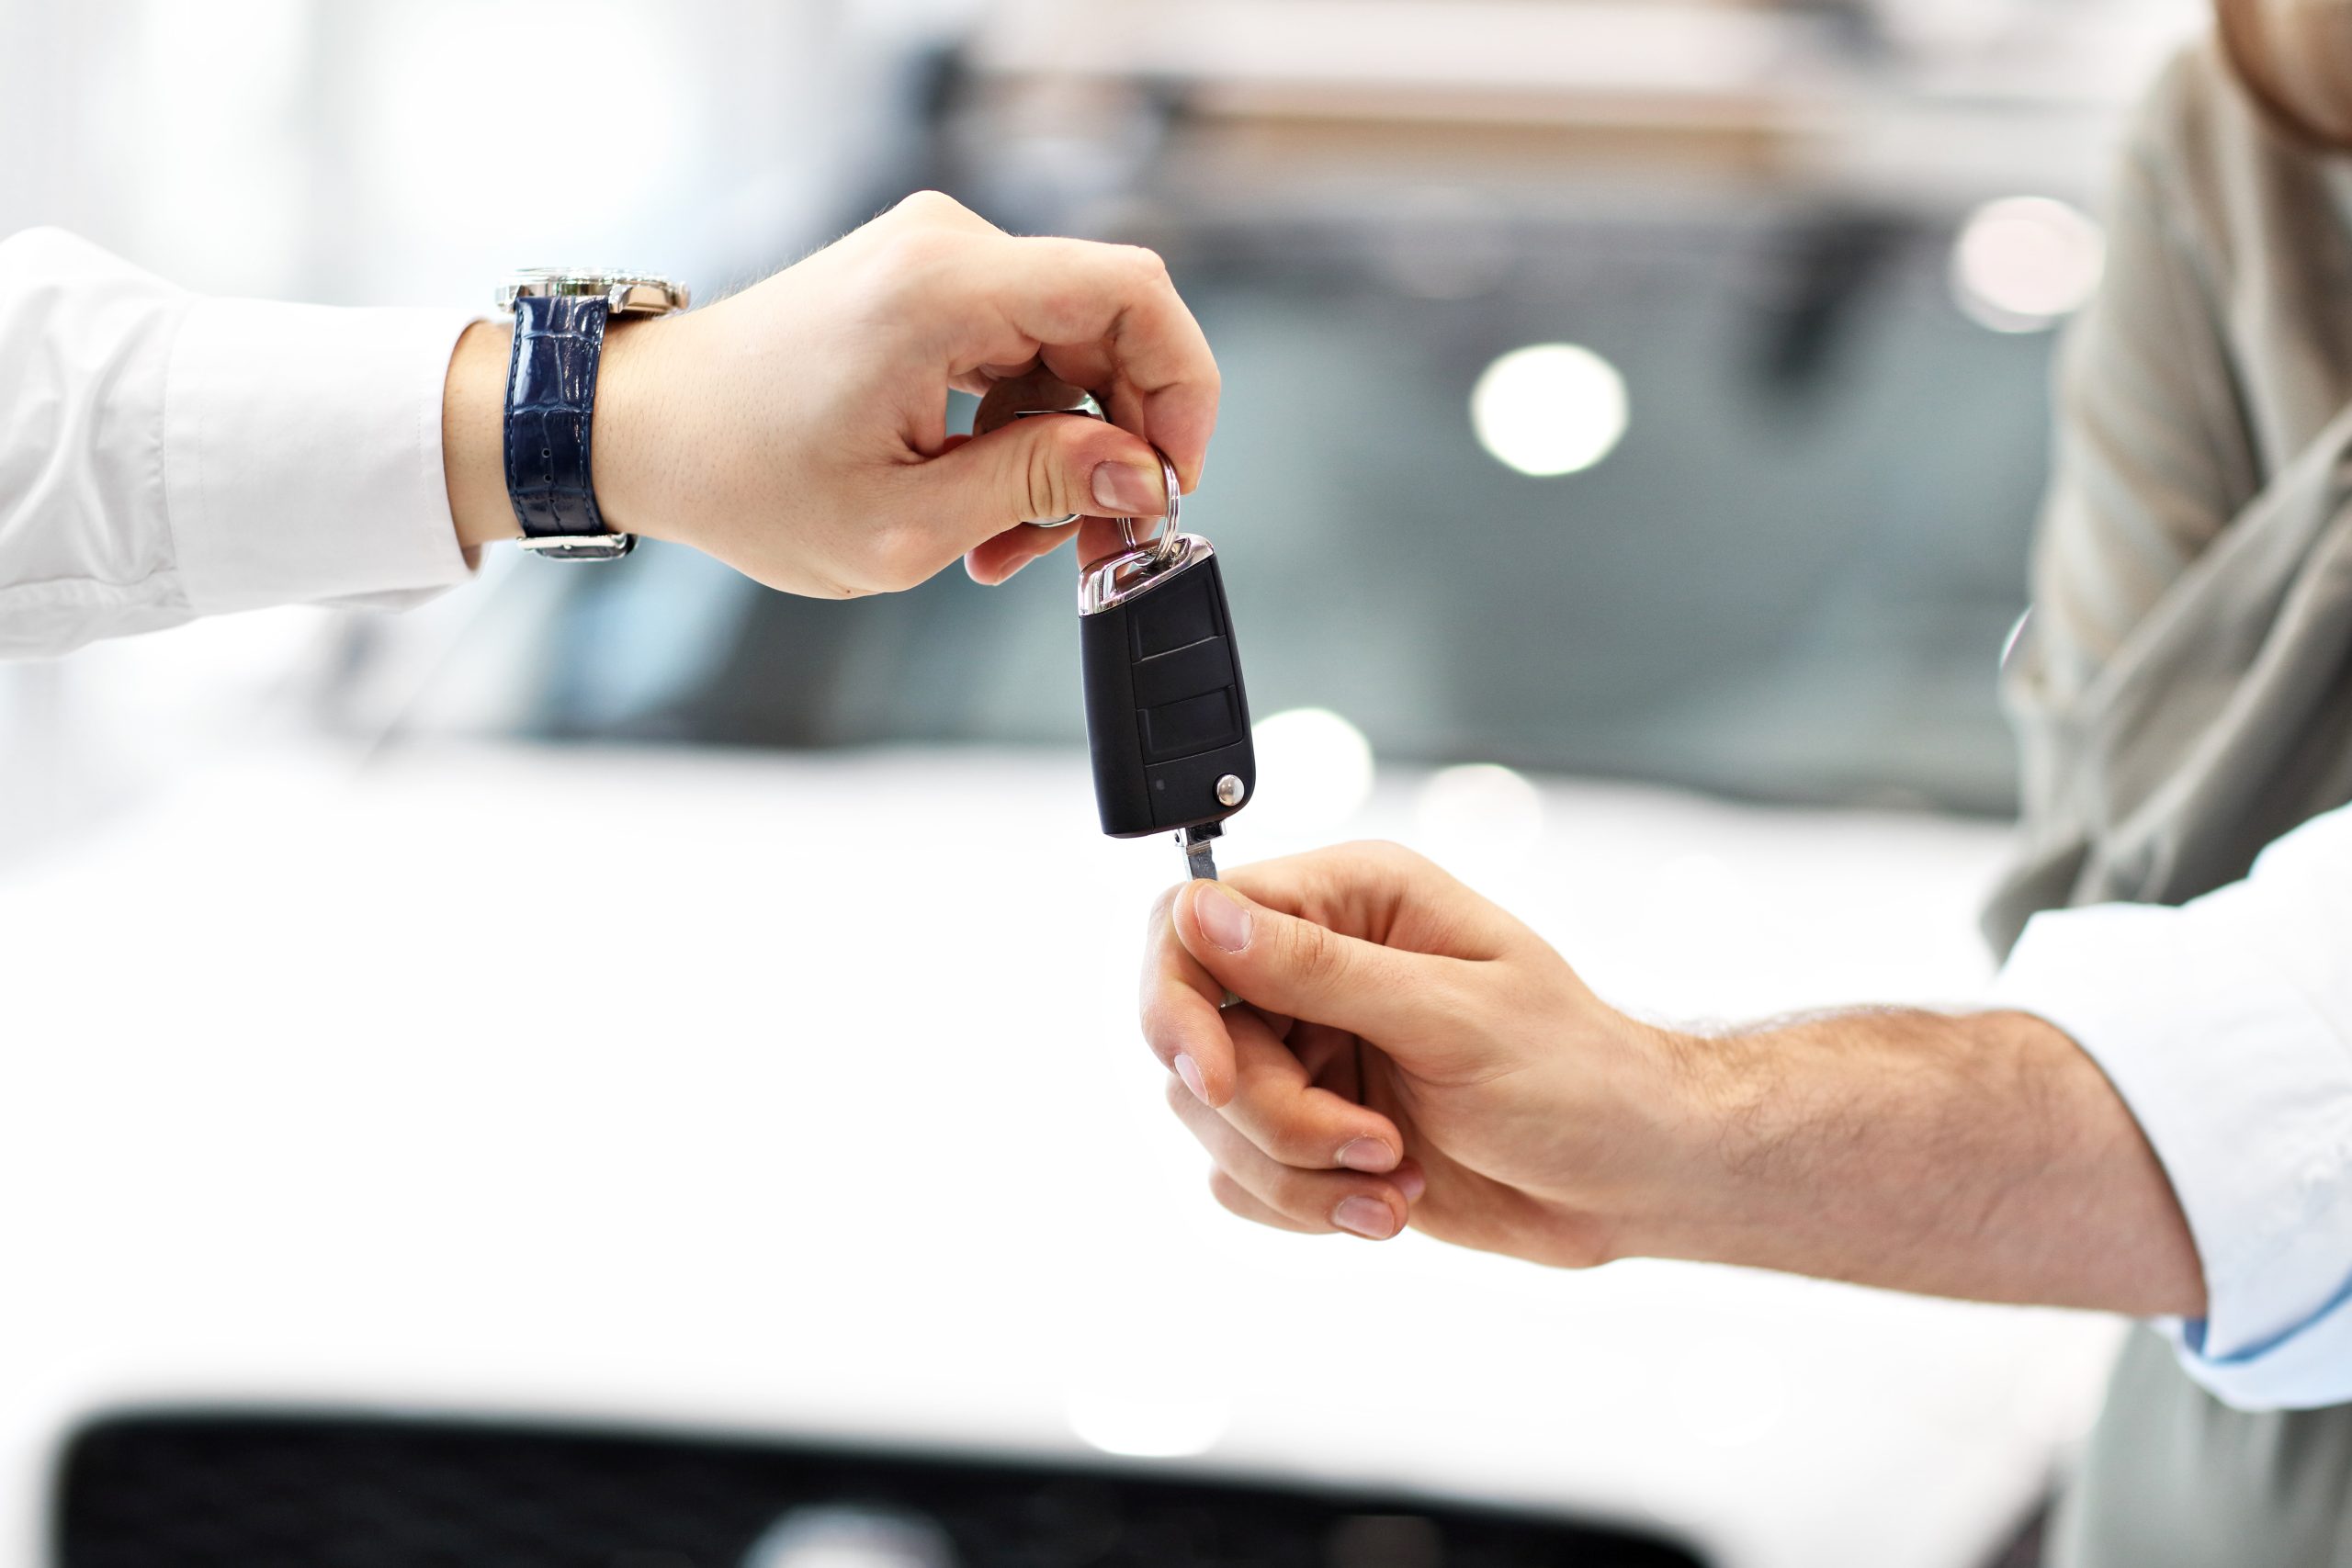 Are you going for a new car or a used car?